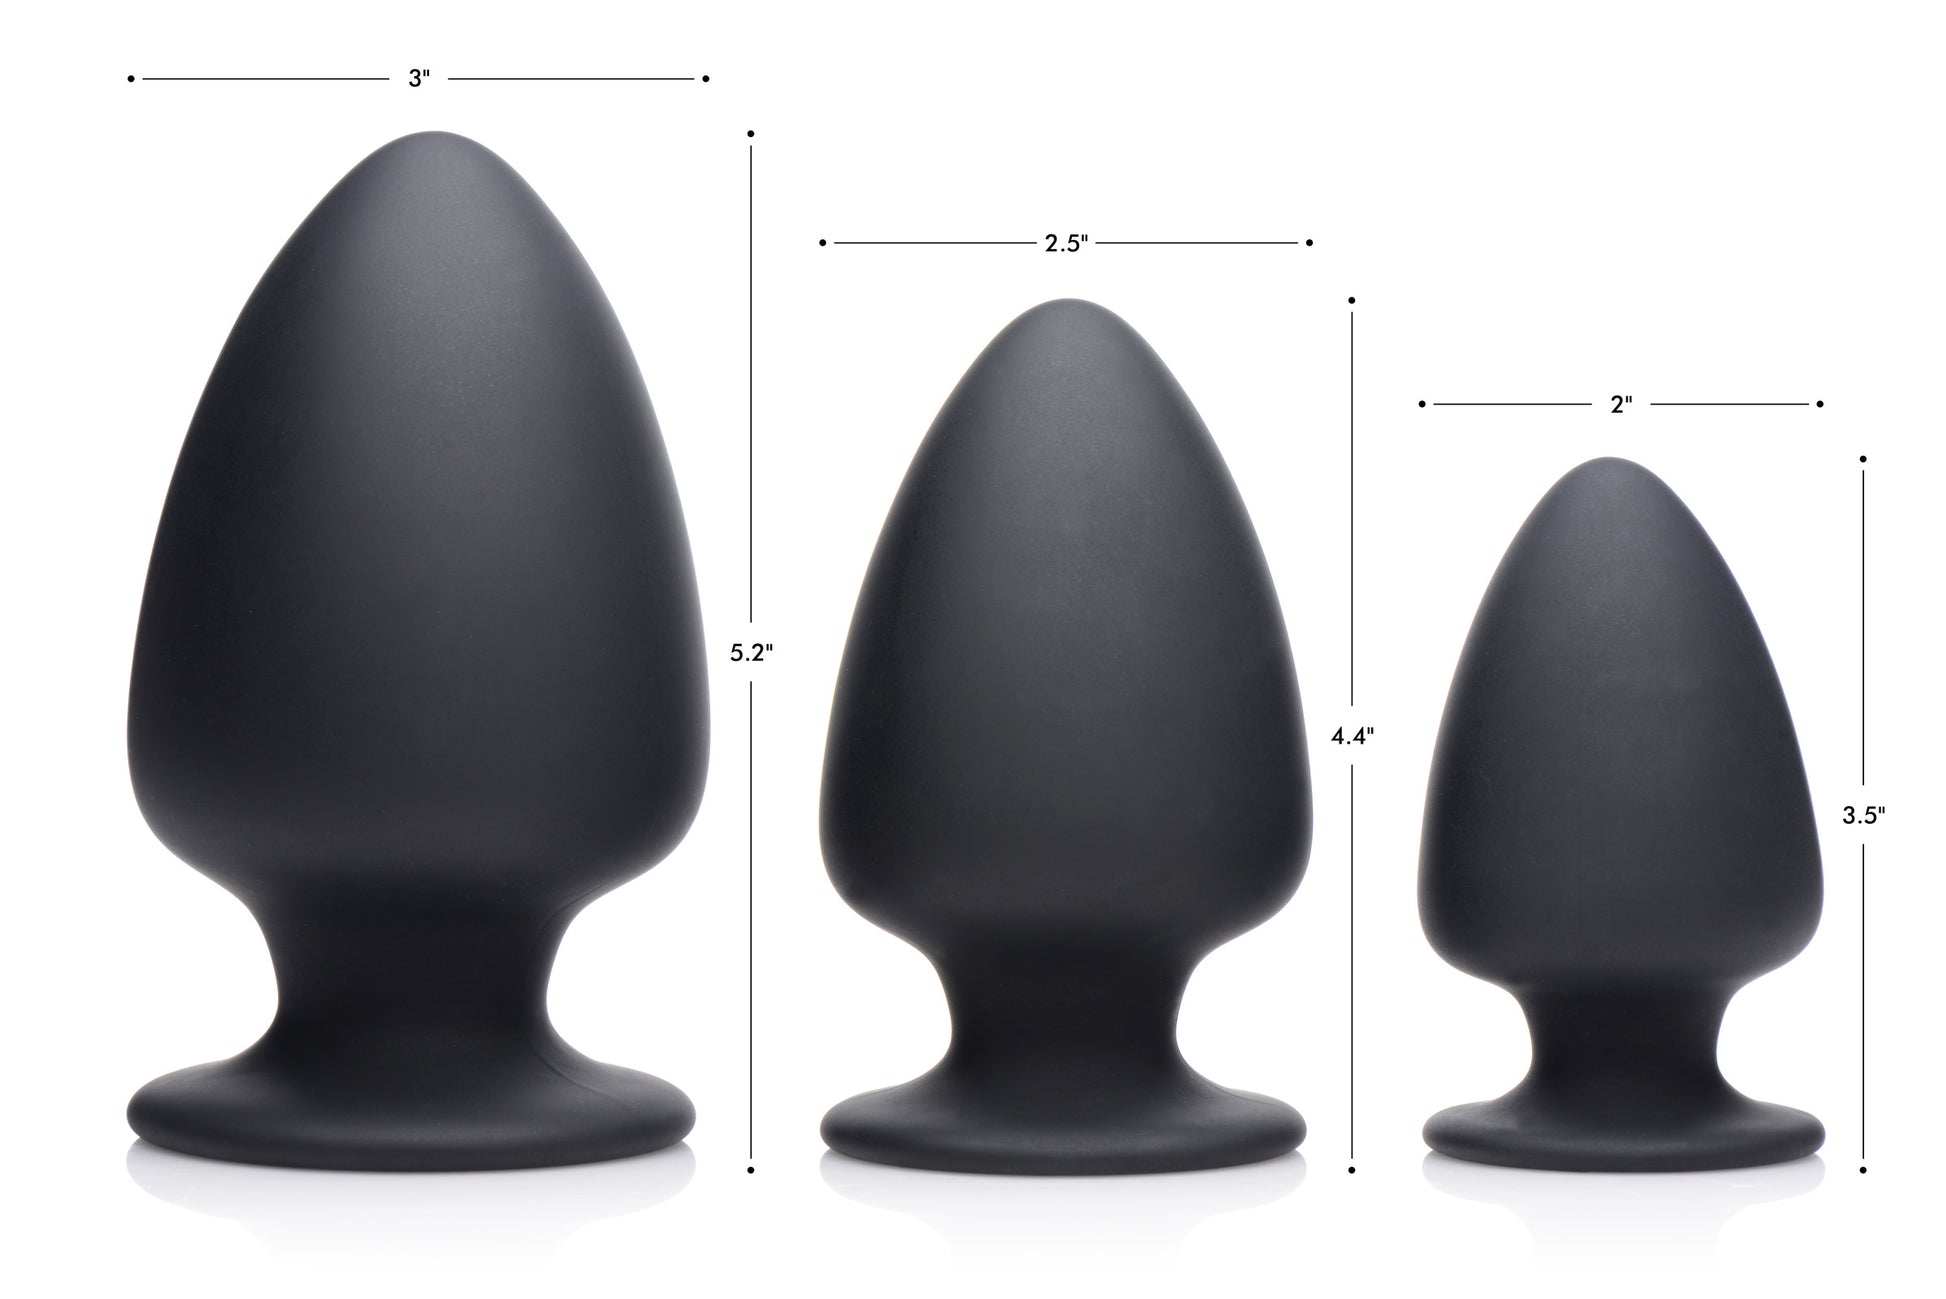 Squeezable Silicone Anal Plug - Small - UABDSM